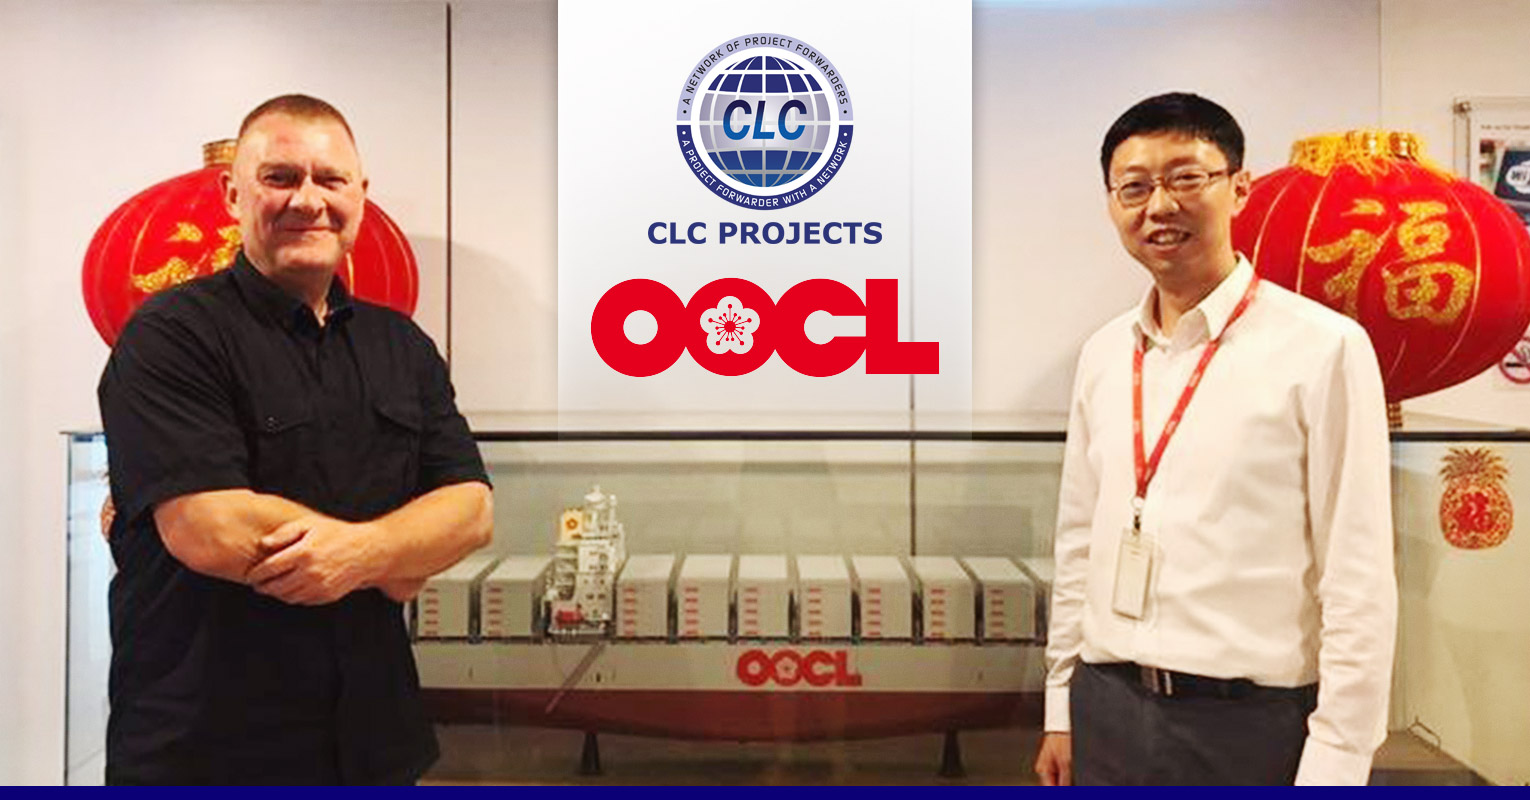 CLC Projects met with OOCL Cambodia